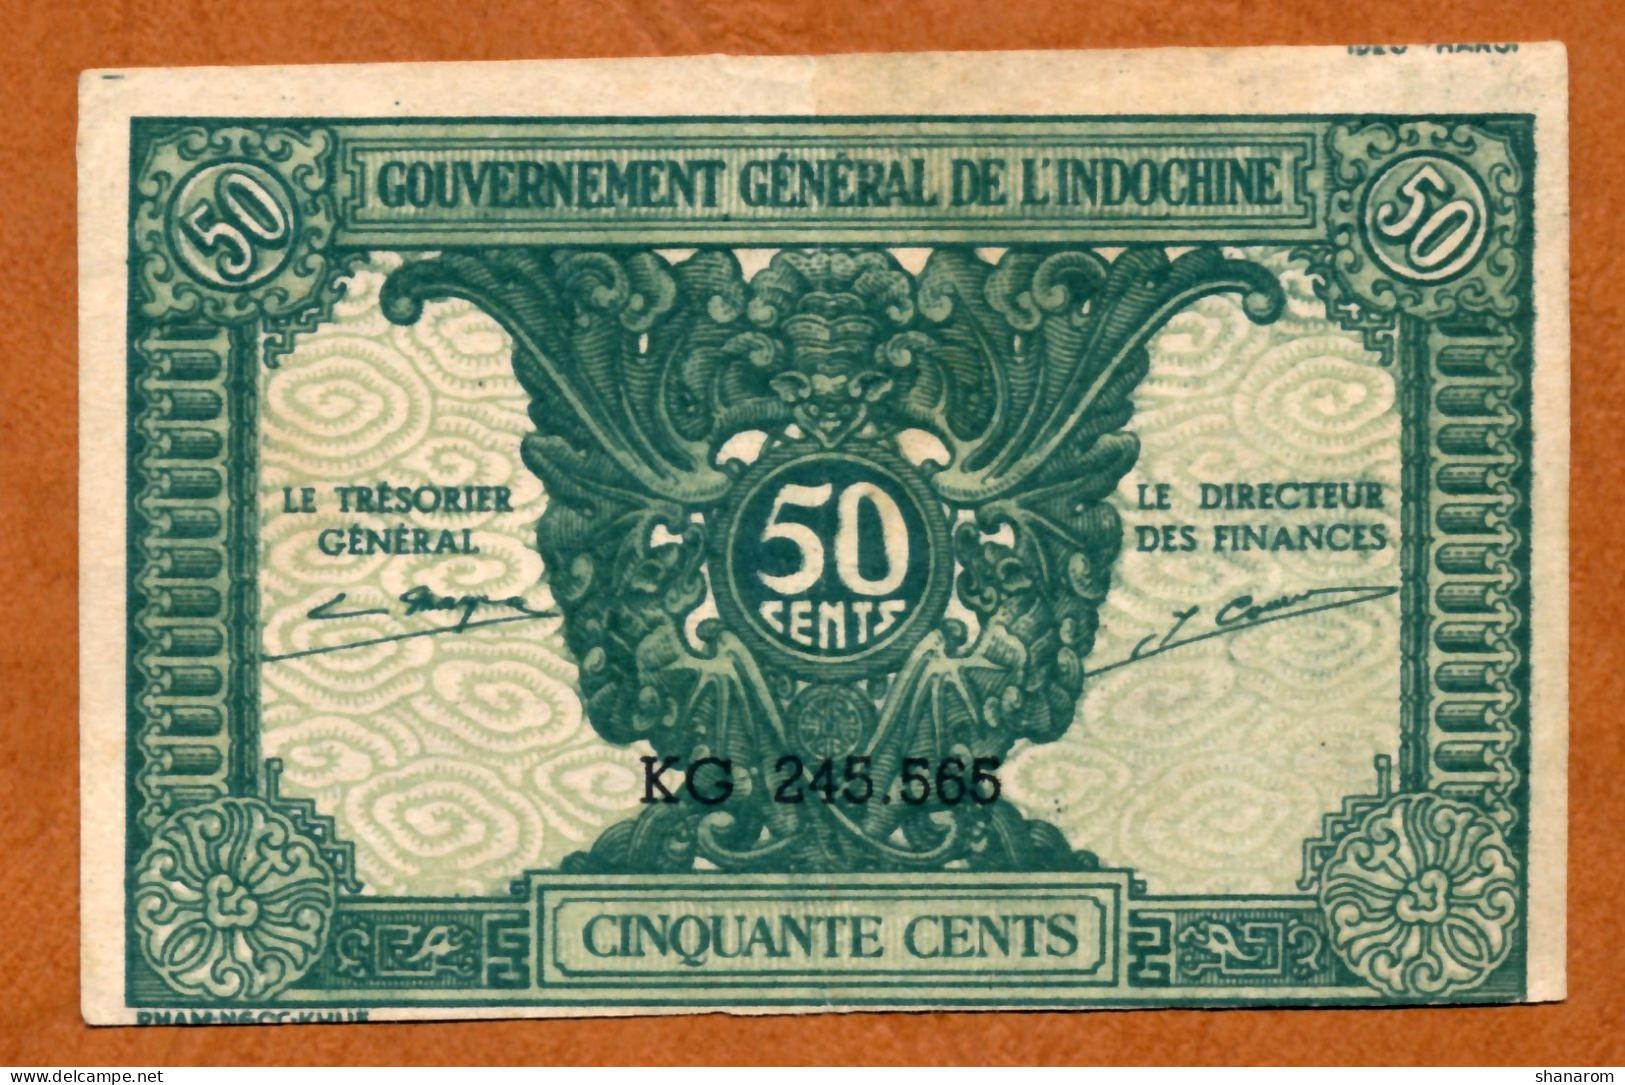 1943 // INDOCHINE // GOUVERNEMENT GENERAL // Cinquante Cents // SUP // XF - Indochina